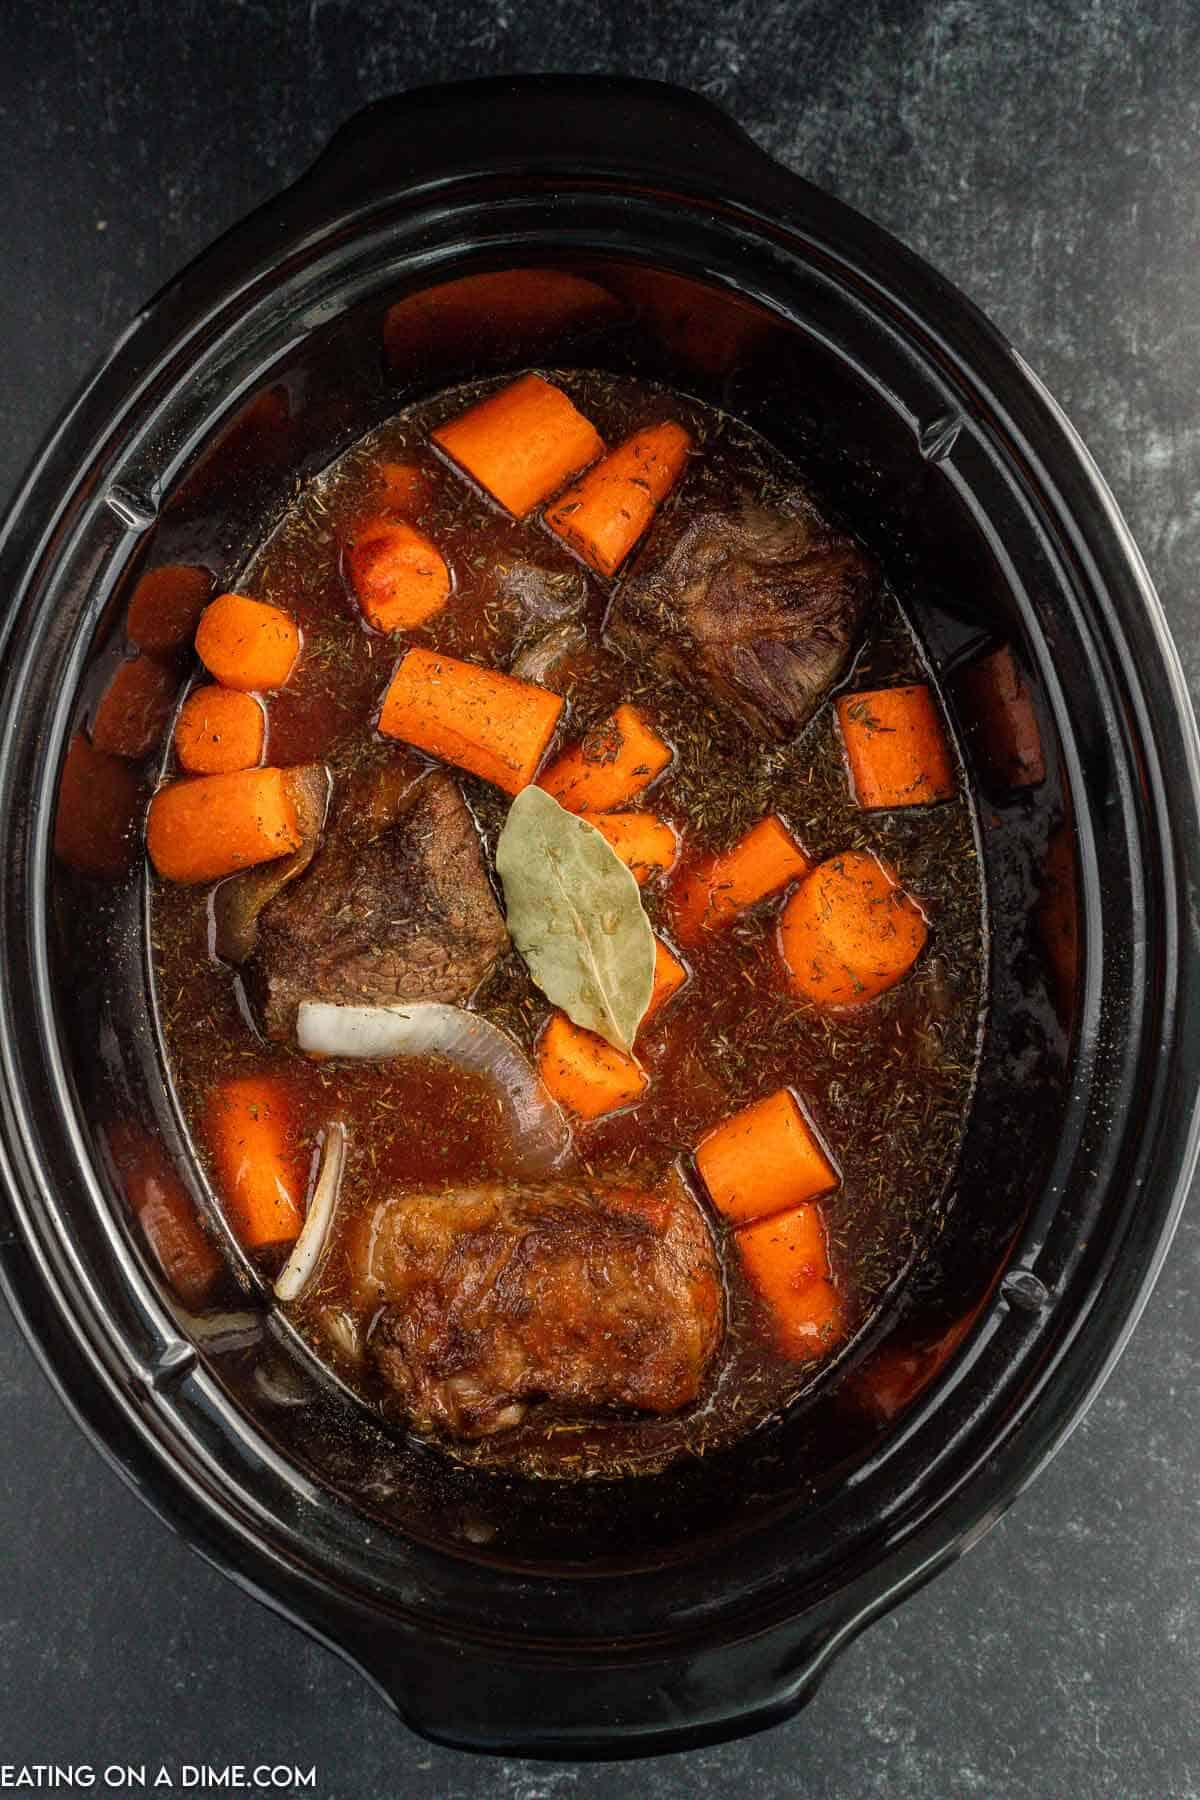 placing the cooked short ribs in the slow cooker with the remaining ingredients